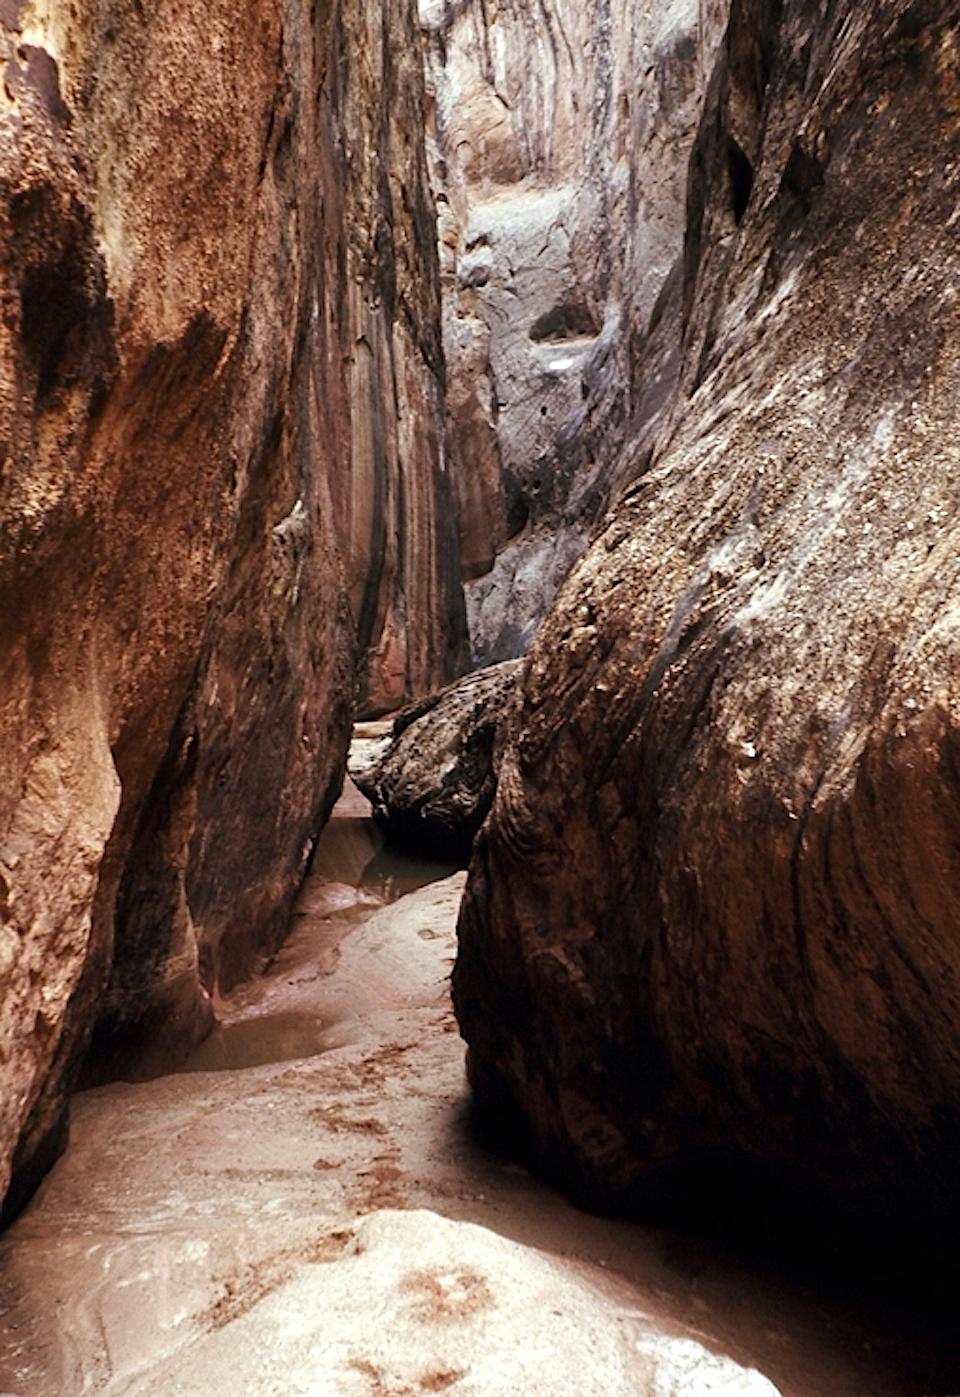 Beginning in January visitors to Capitol Reef National Park who want to go canyoneering will need a permit/NPS